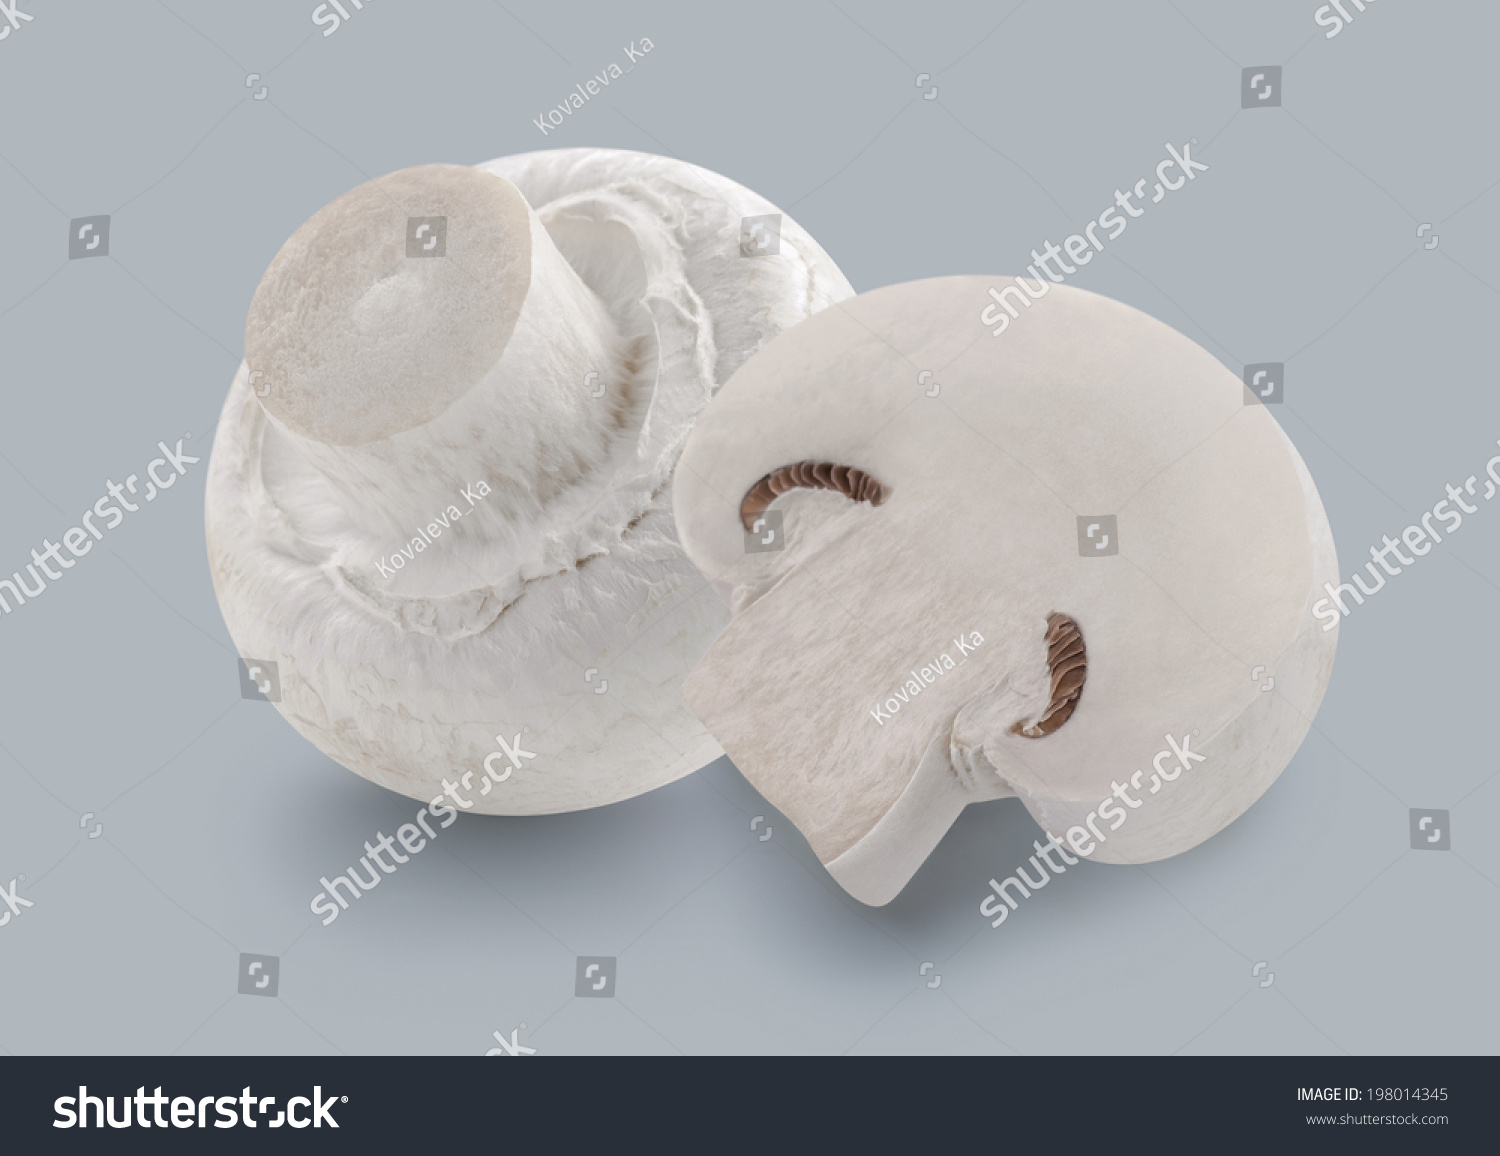 Button mushroom champignons isolated on grey background for package design #198014345